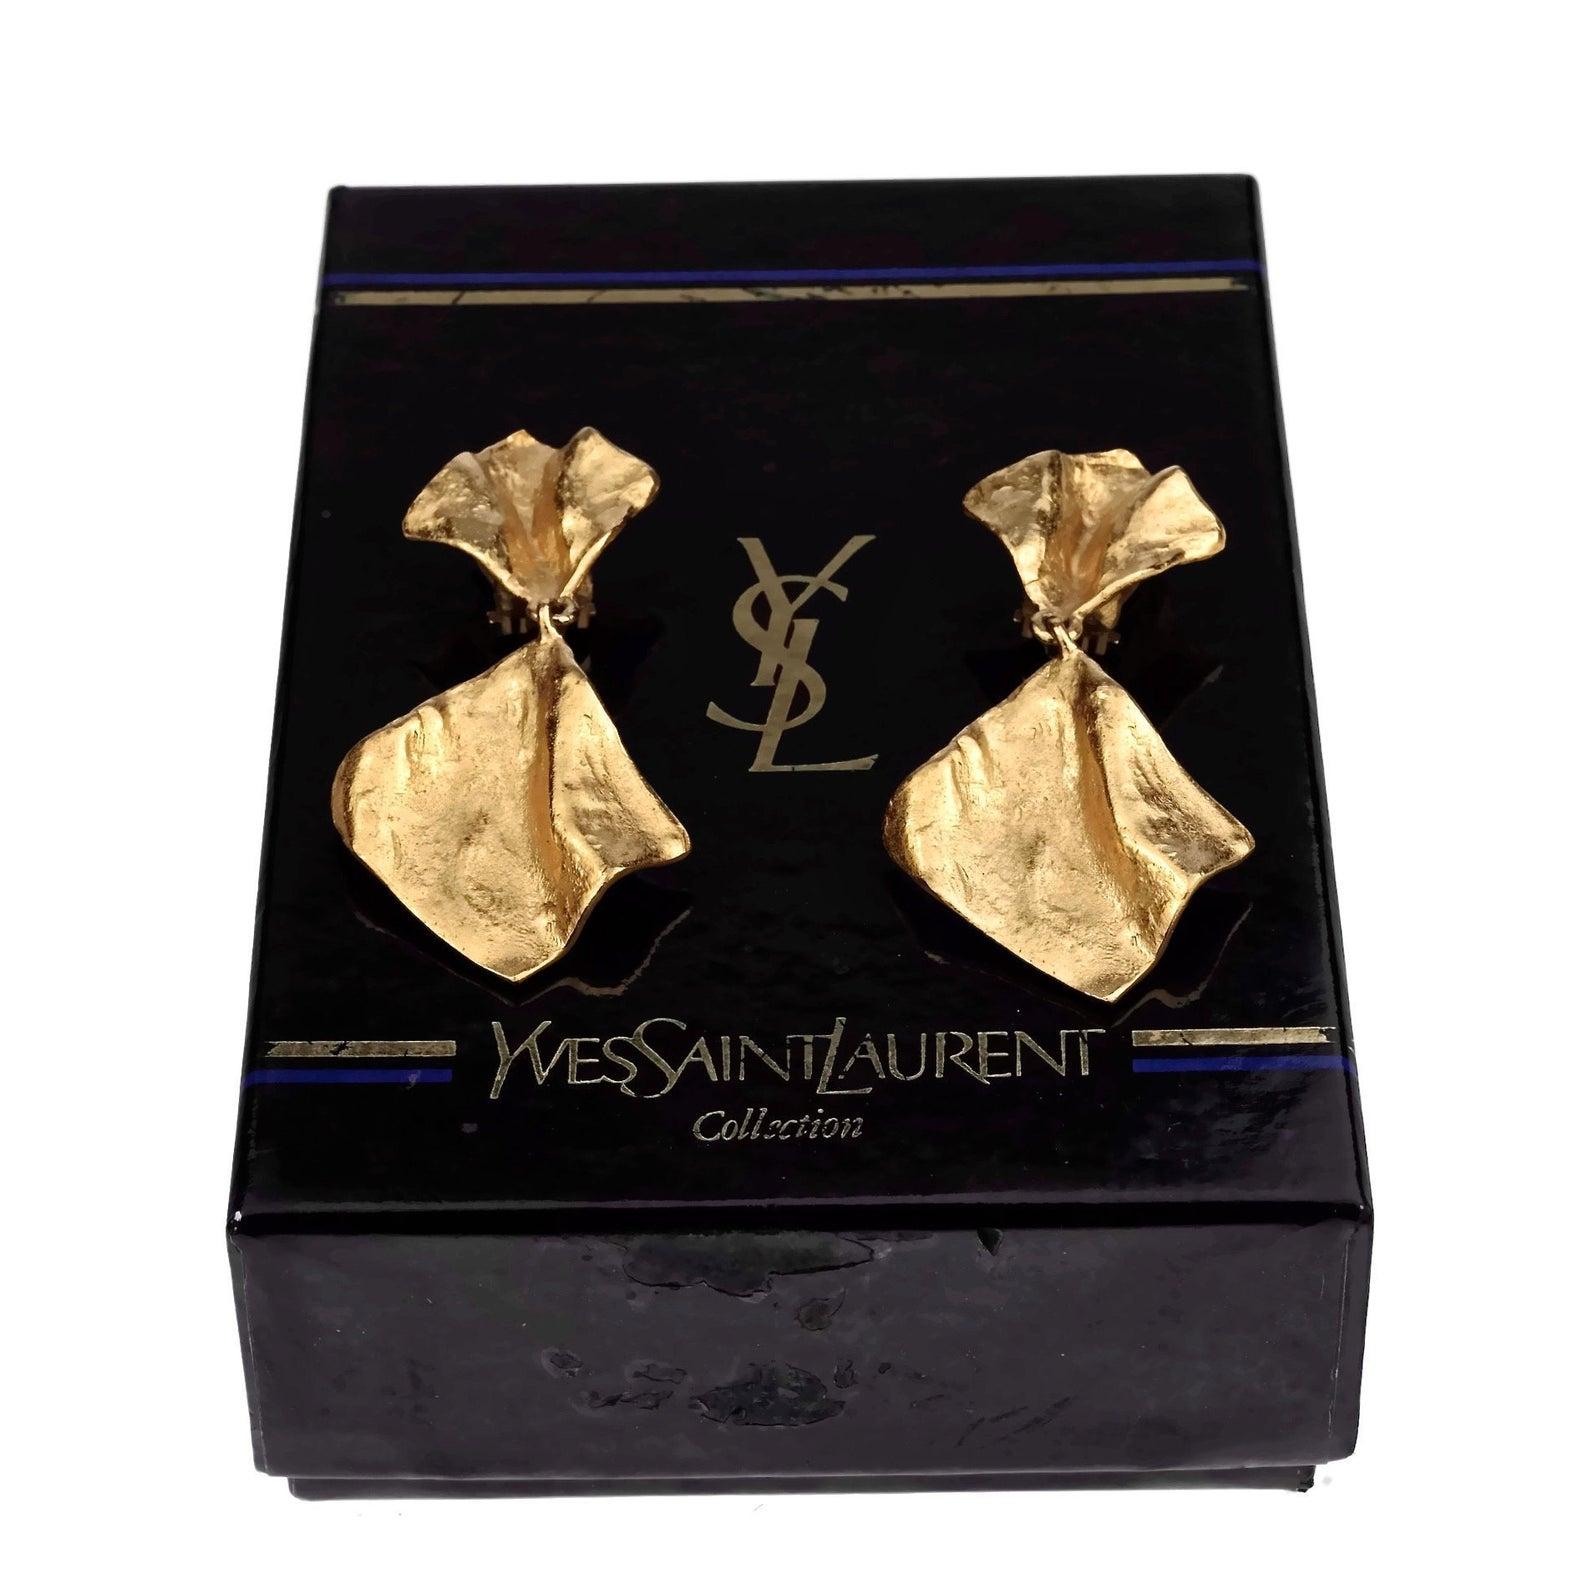 Vintage YVES SAINT LAURENT Ysl Gilt Wrinkled Dangling Earrings

Measurements:
Height: 2.36 inches (6 cm)
Width: 1.10 inches (2.8 cm)
Weight per Earring: 11 grams

Features:
- 100% Authentic YVES SAINT LAURENT.
- Textured inverse square and wrinkled